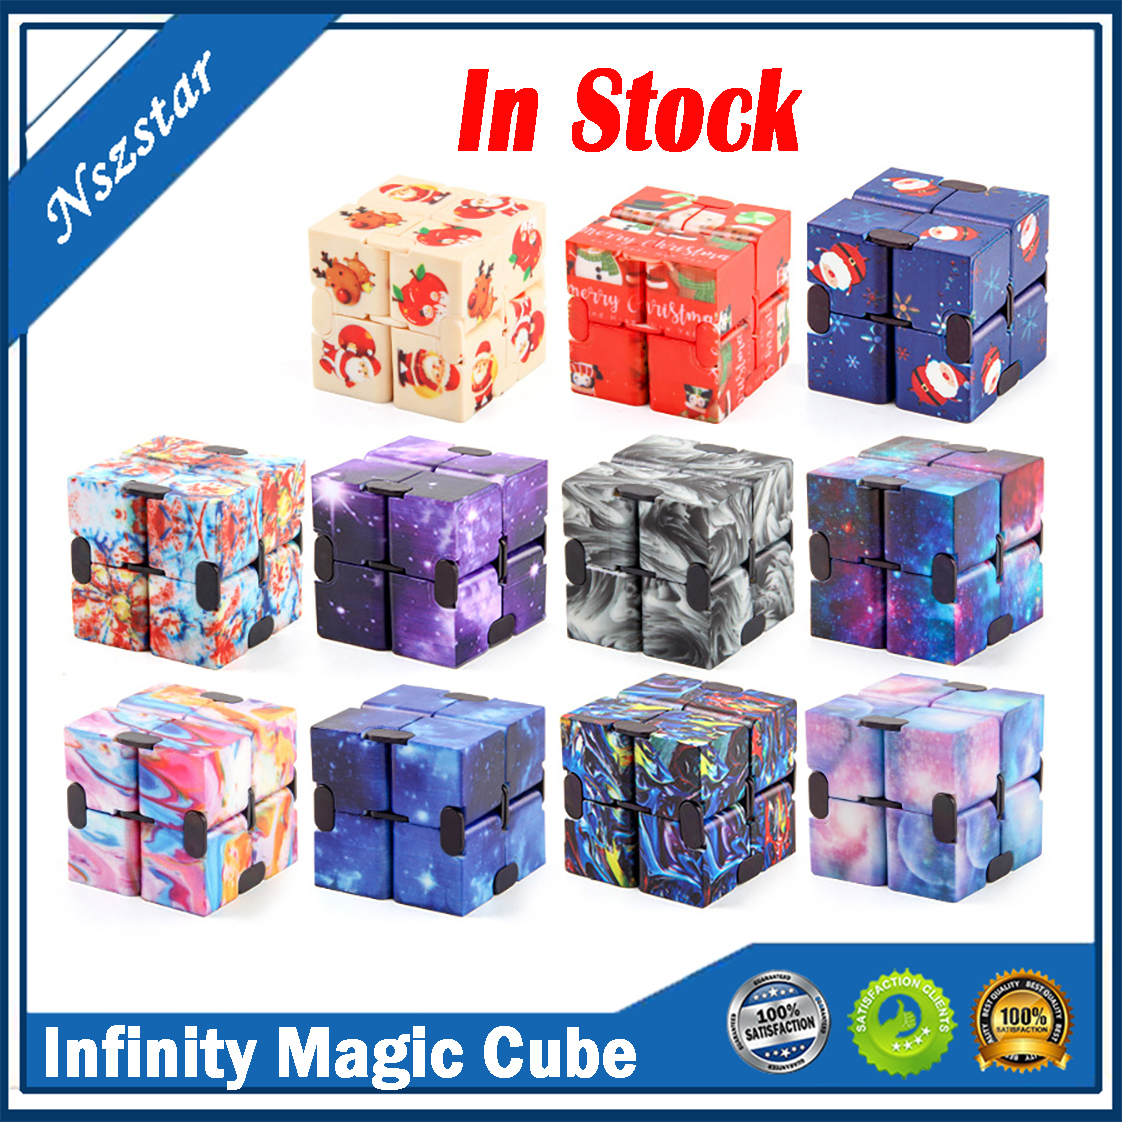 

Infinity Magic Cube Creative Galaxy Fitget Toys Party Antistress Office Flip Cubic Puzzle Mini Blocks Decompression Toy Christmas Gifts